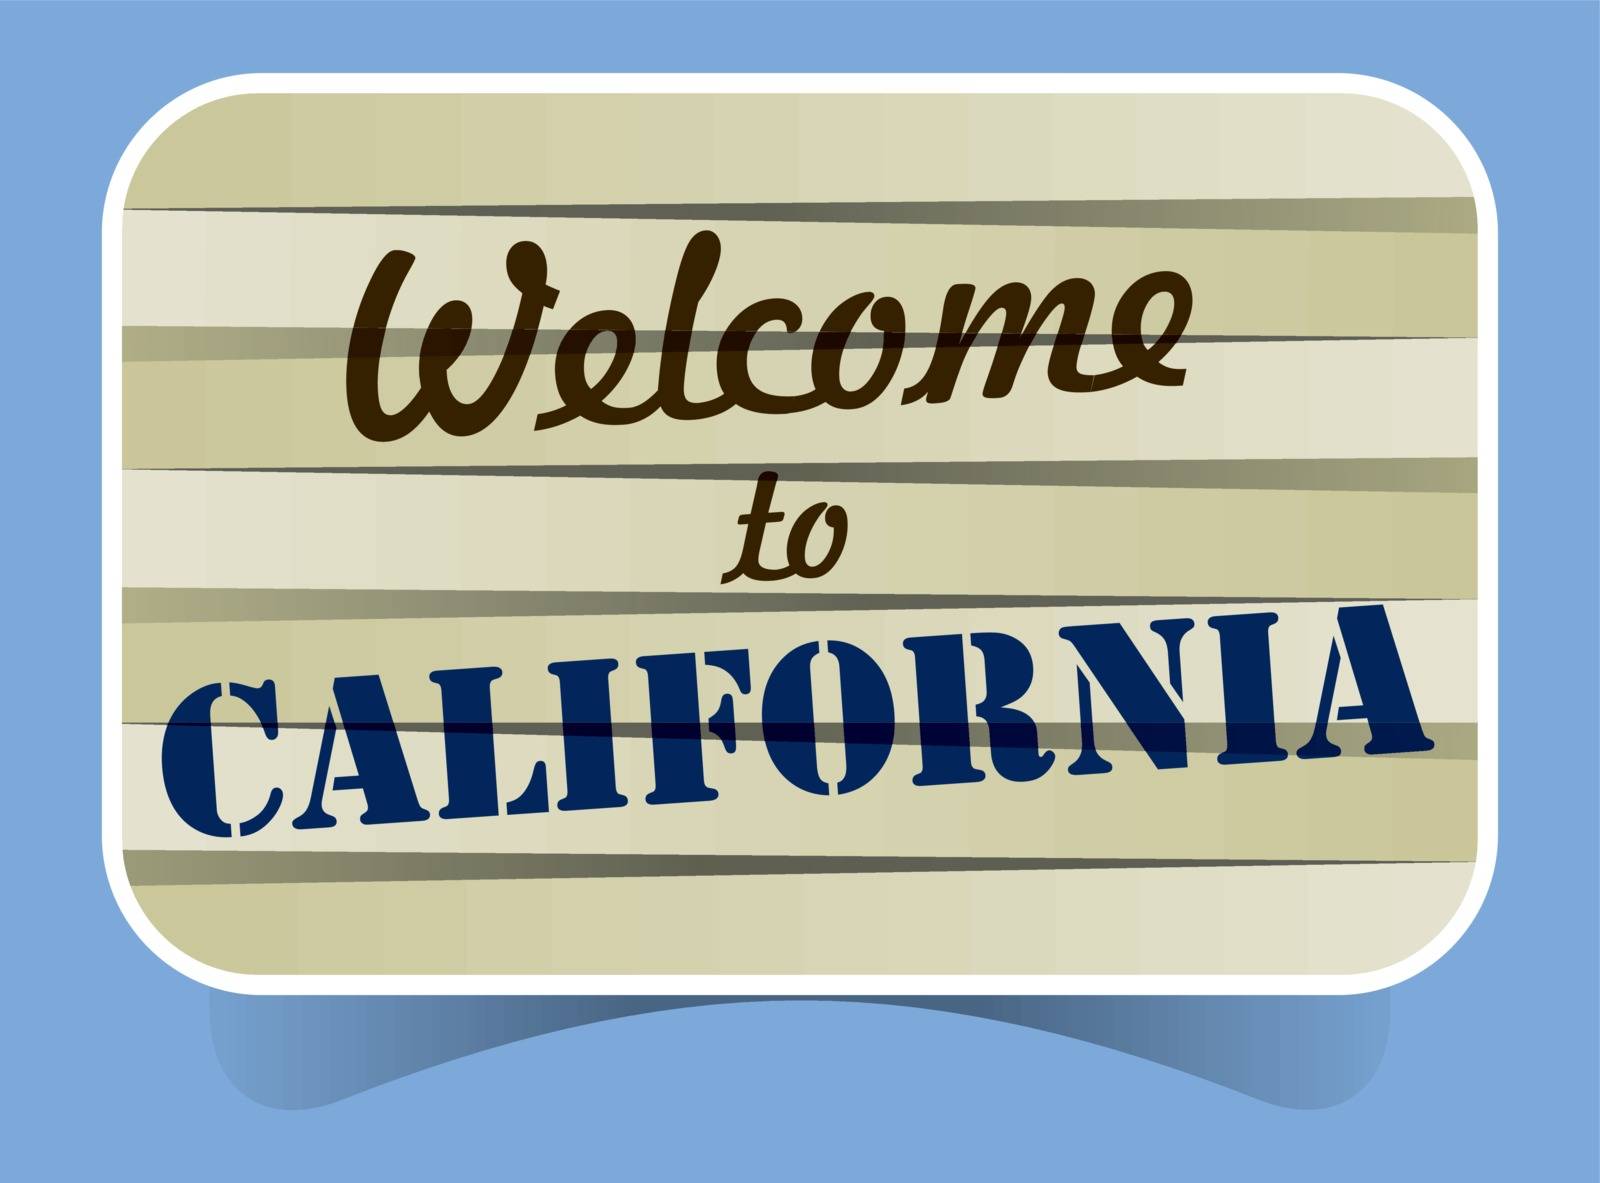 Abstract Welcome To California Banner vector Illustration